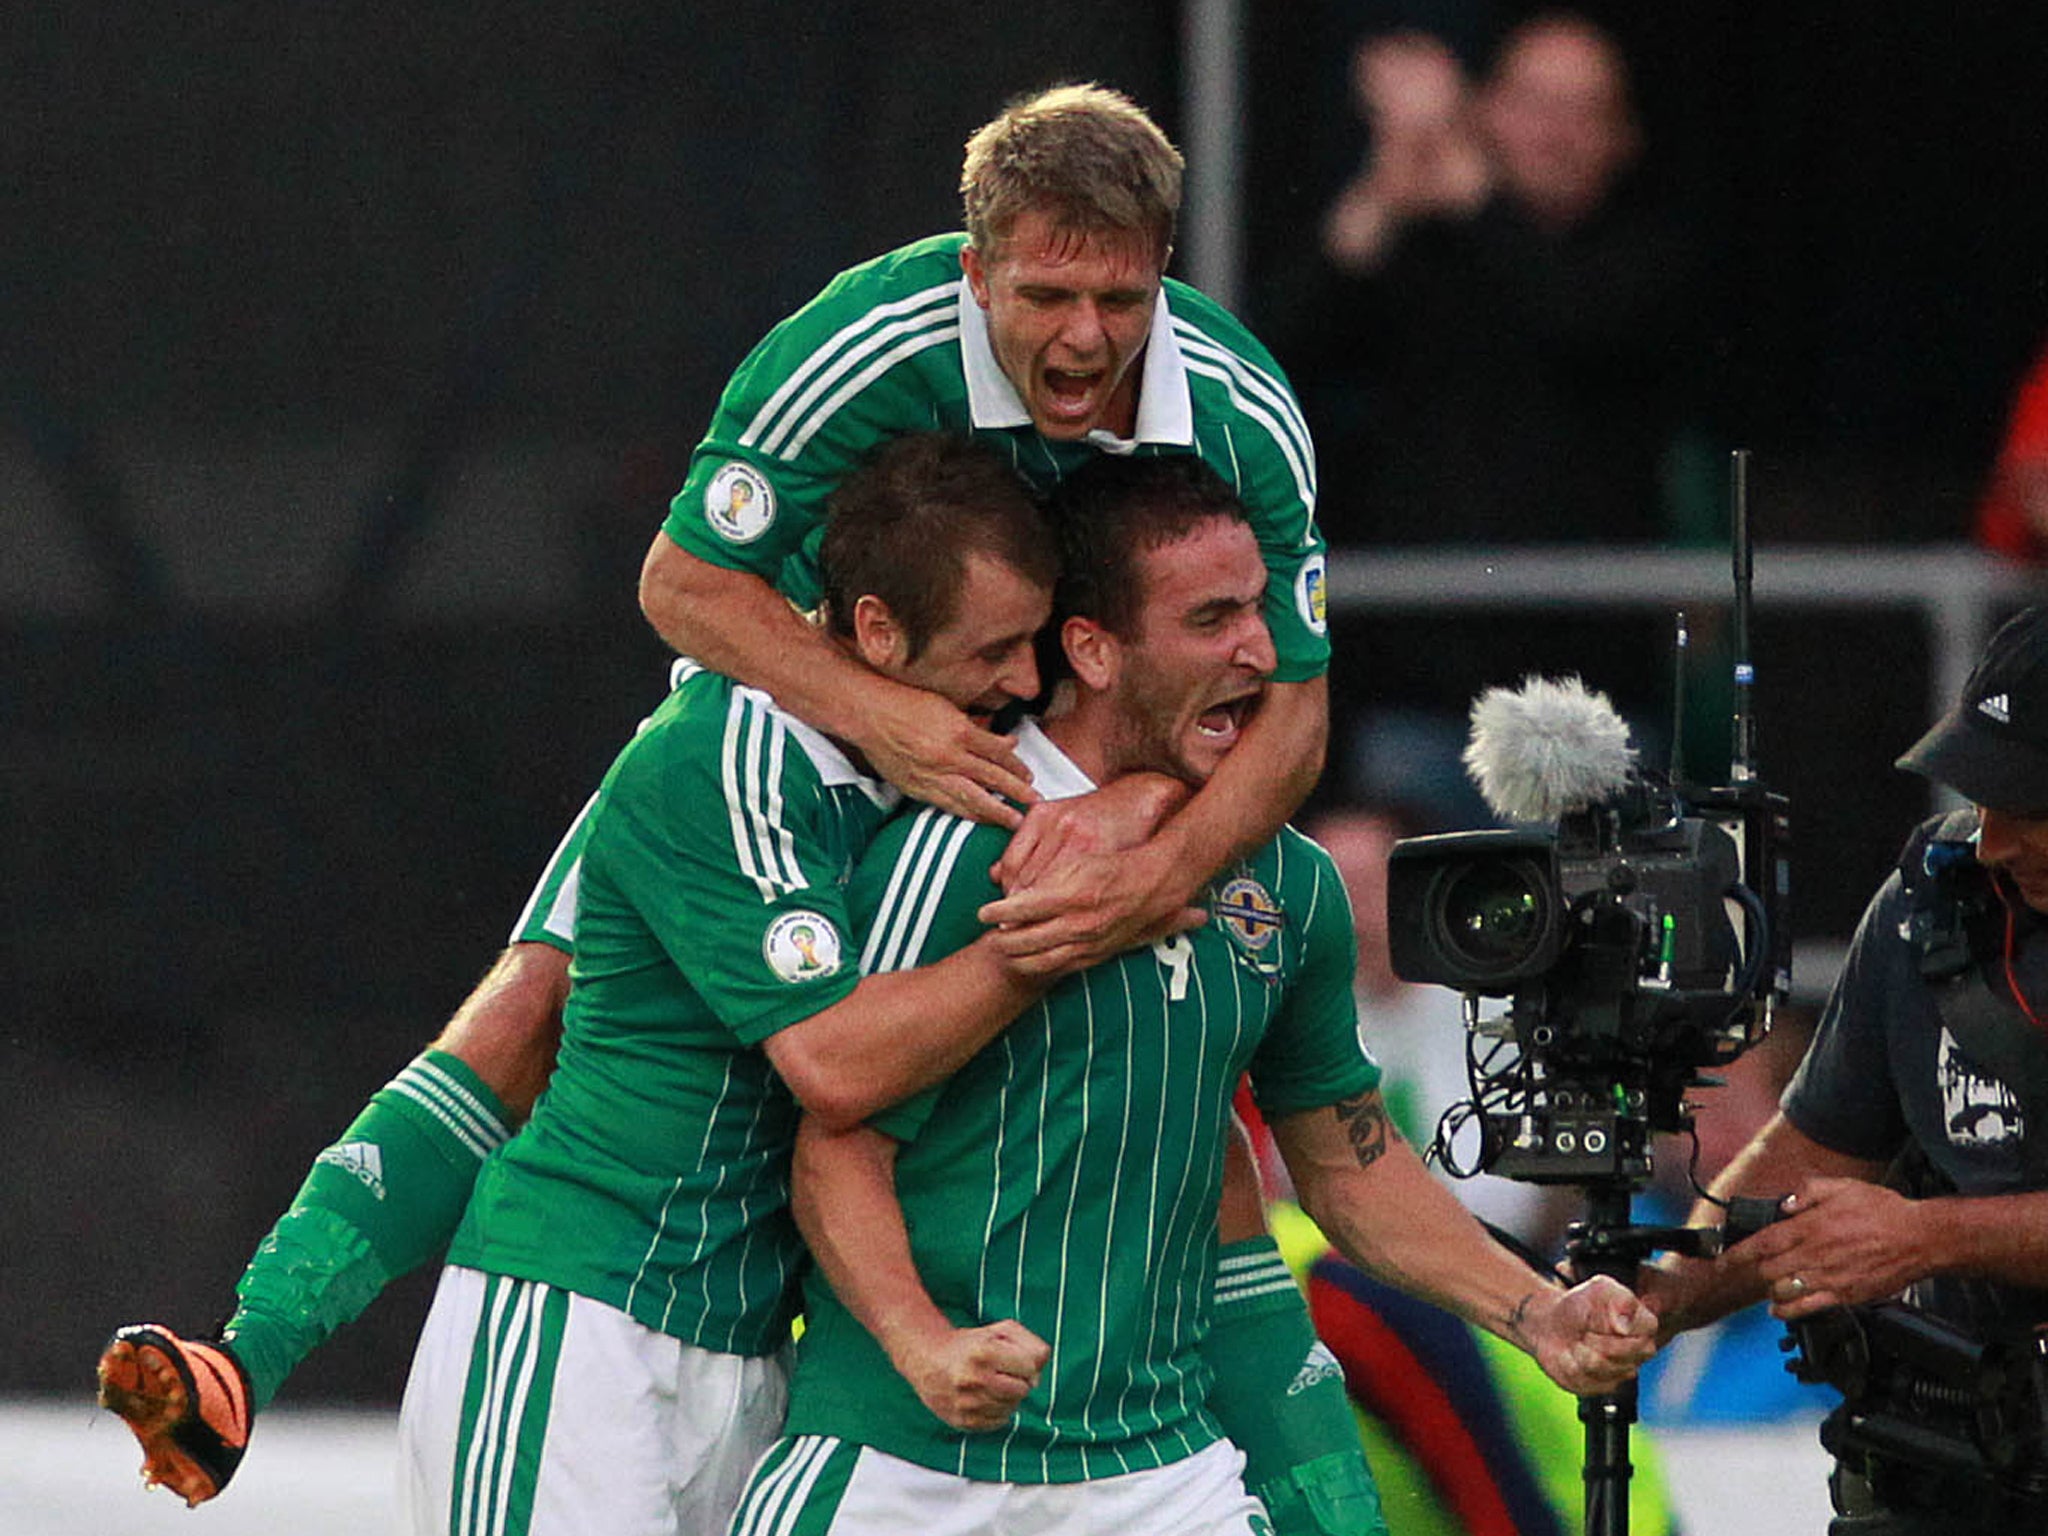 Northern Ireland's Martin Paterson (R) celebrates with team mates after scoring his team's first goal during the FIFA 2014 World Cup European zone group F qualifying football match between Russia and Northern Ireland